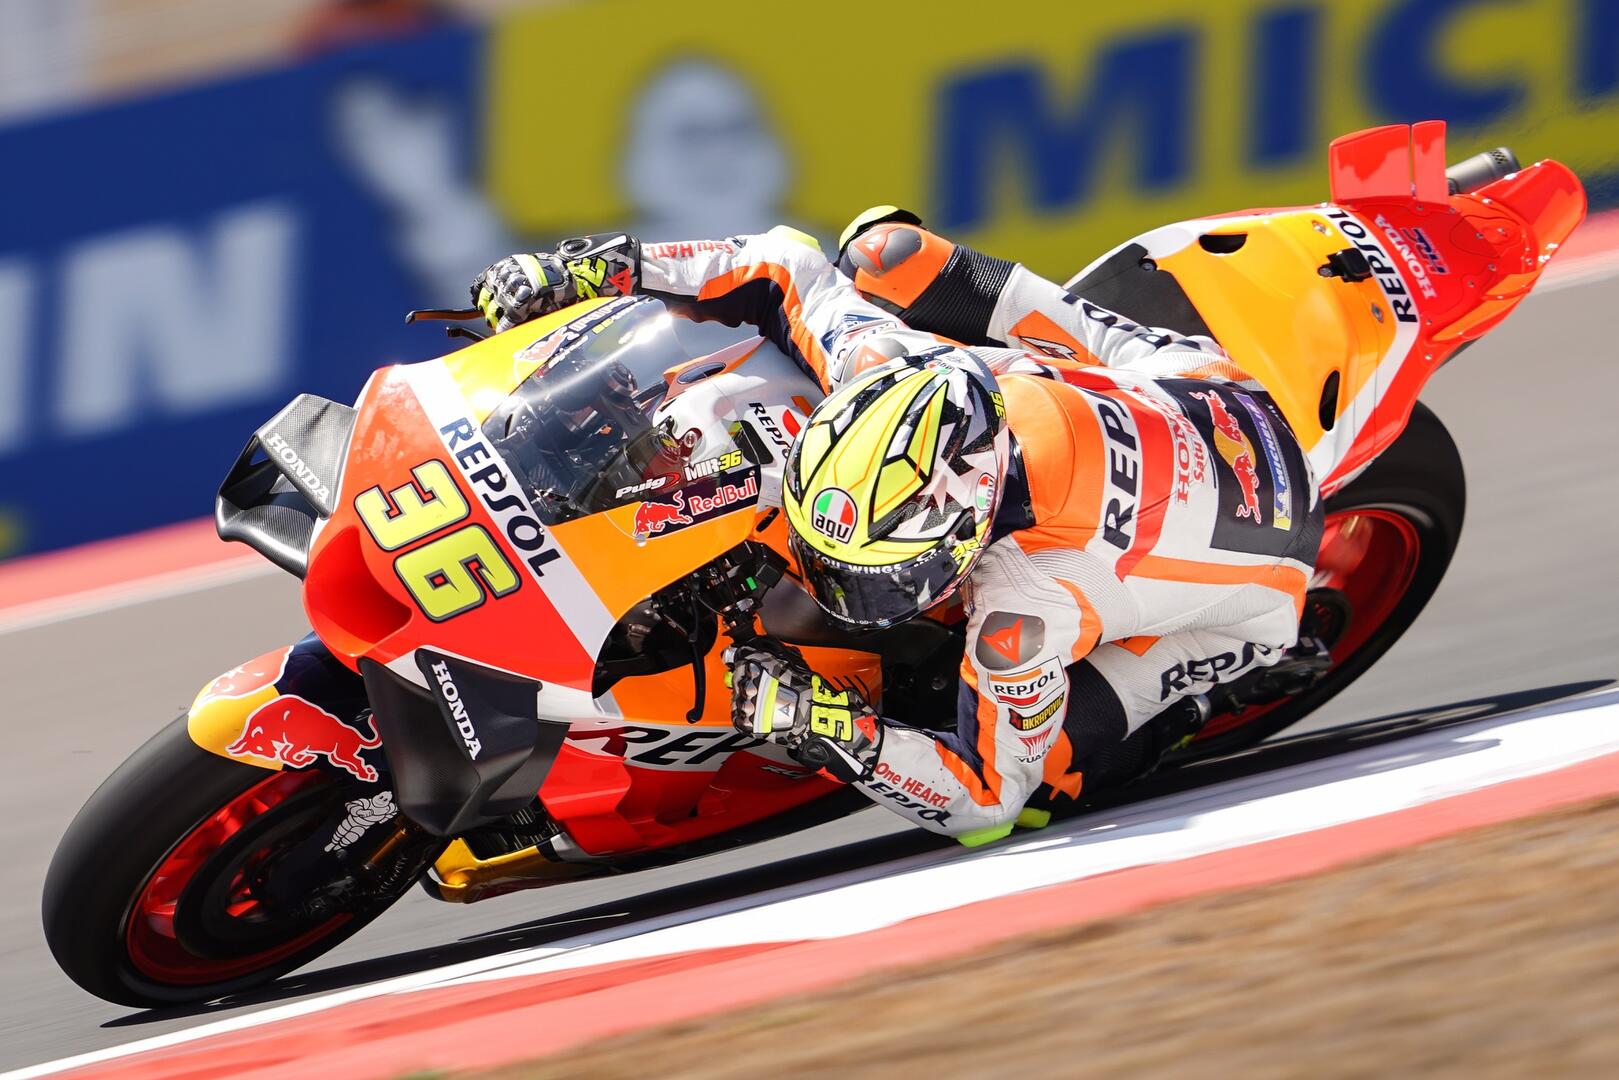 Repsol Honda Team work for Sunday success after complicated Saturday in Indonesia